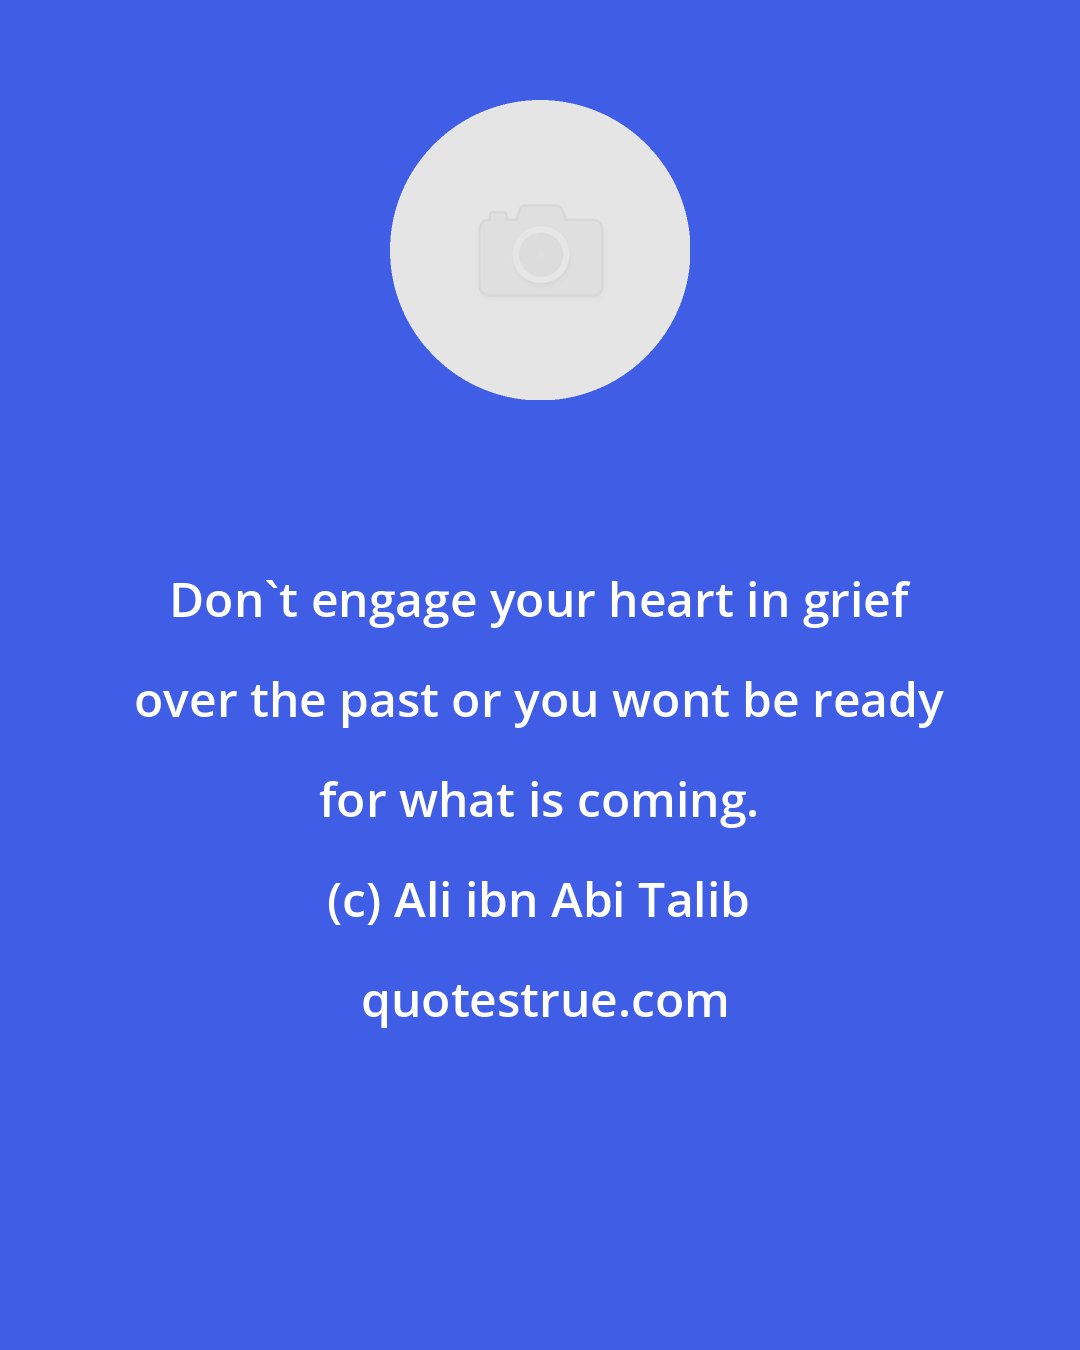 Ali ibn Abi Talib: Don't engage your heart in grief over the past or you wont be ready for what is coming.